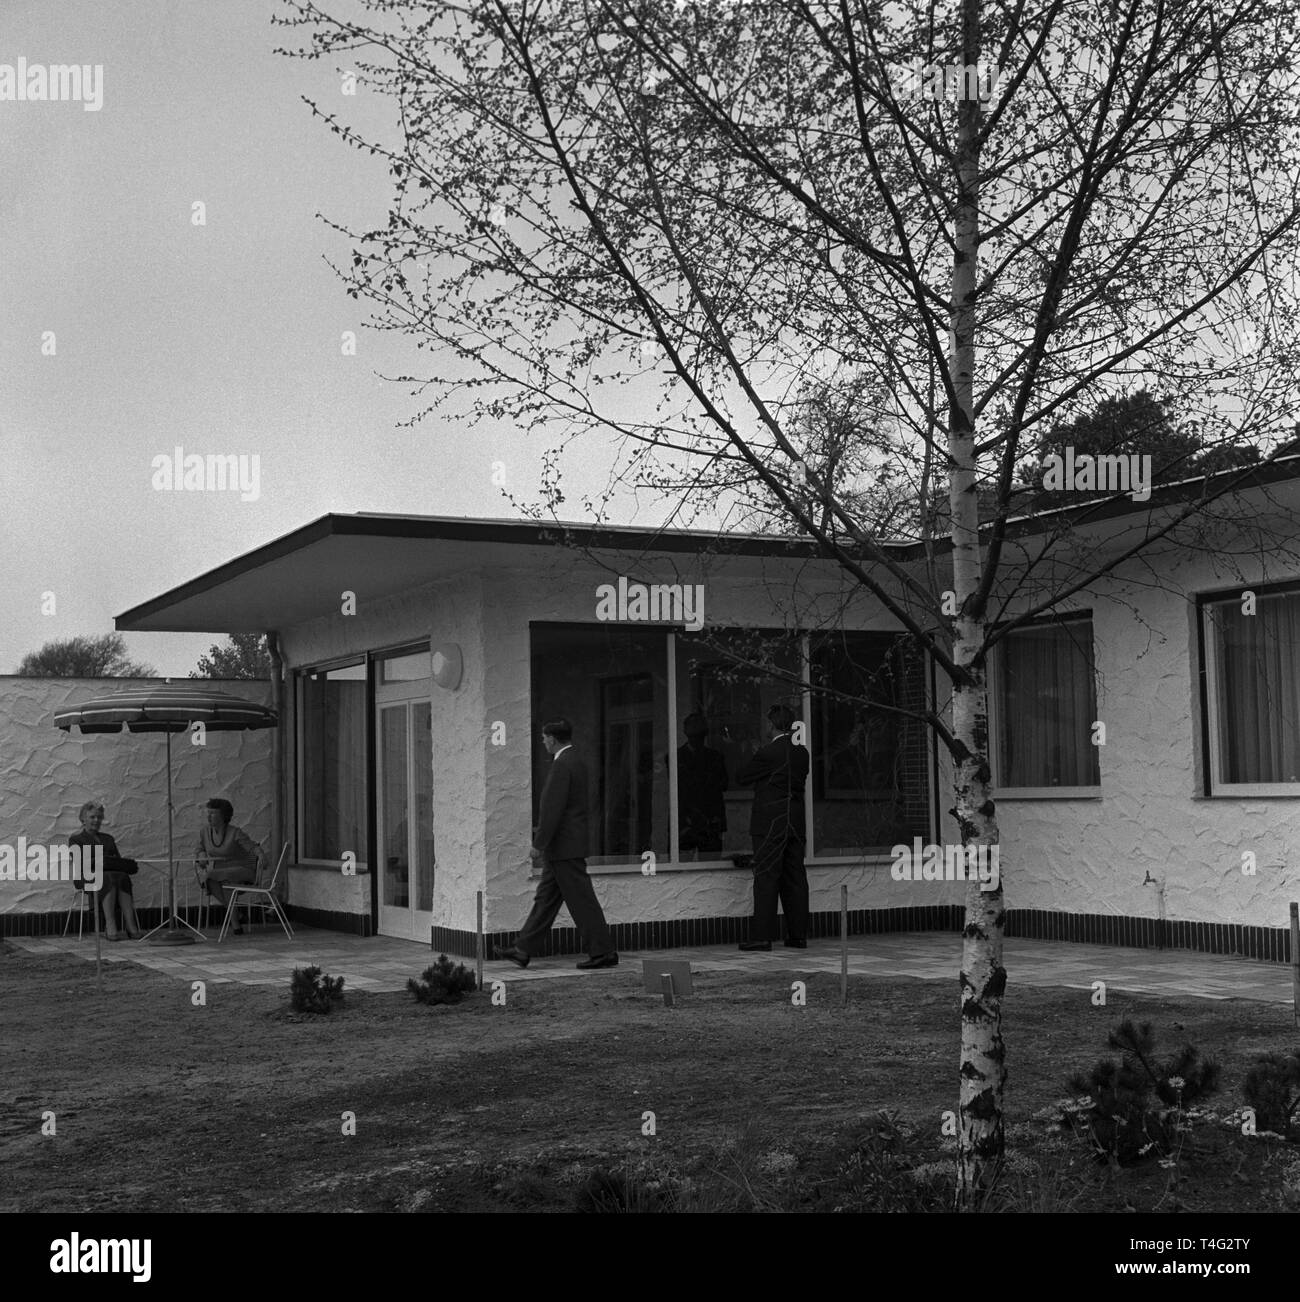 View of the single family house in the Grunewald (forest) of Berlin on 29 April 1959, which represents the first prize of the 8th lottery 'Tag der offenen Tür' (translated as 'Open Day'). | usage worldwide Stock Photo